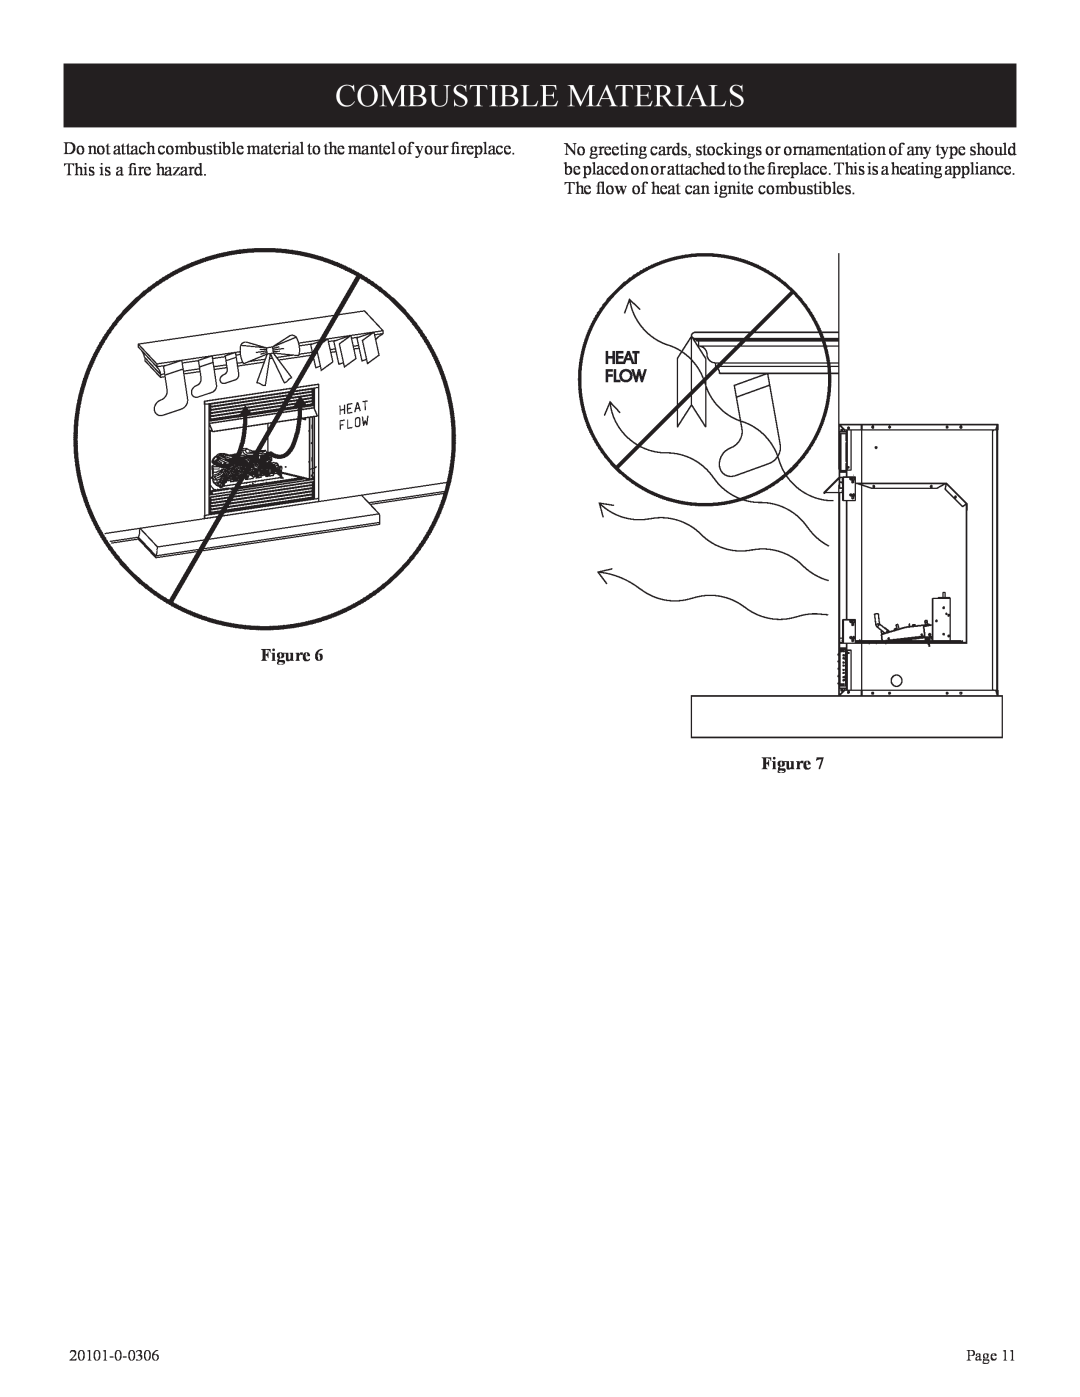 Empire Comfort Systems VFP32FP, VFP36FP, 31)L(N, P)-1, 21)L(N installation instructions Combustible Materials, Figure Figure 